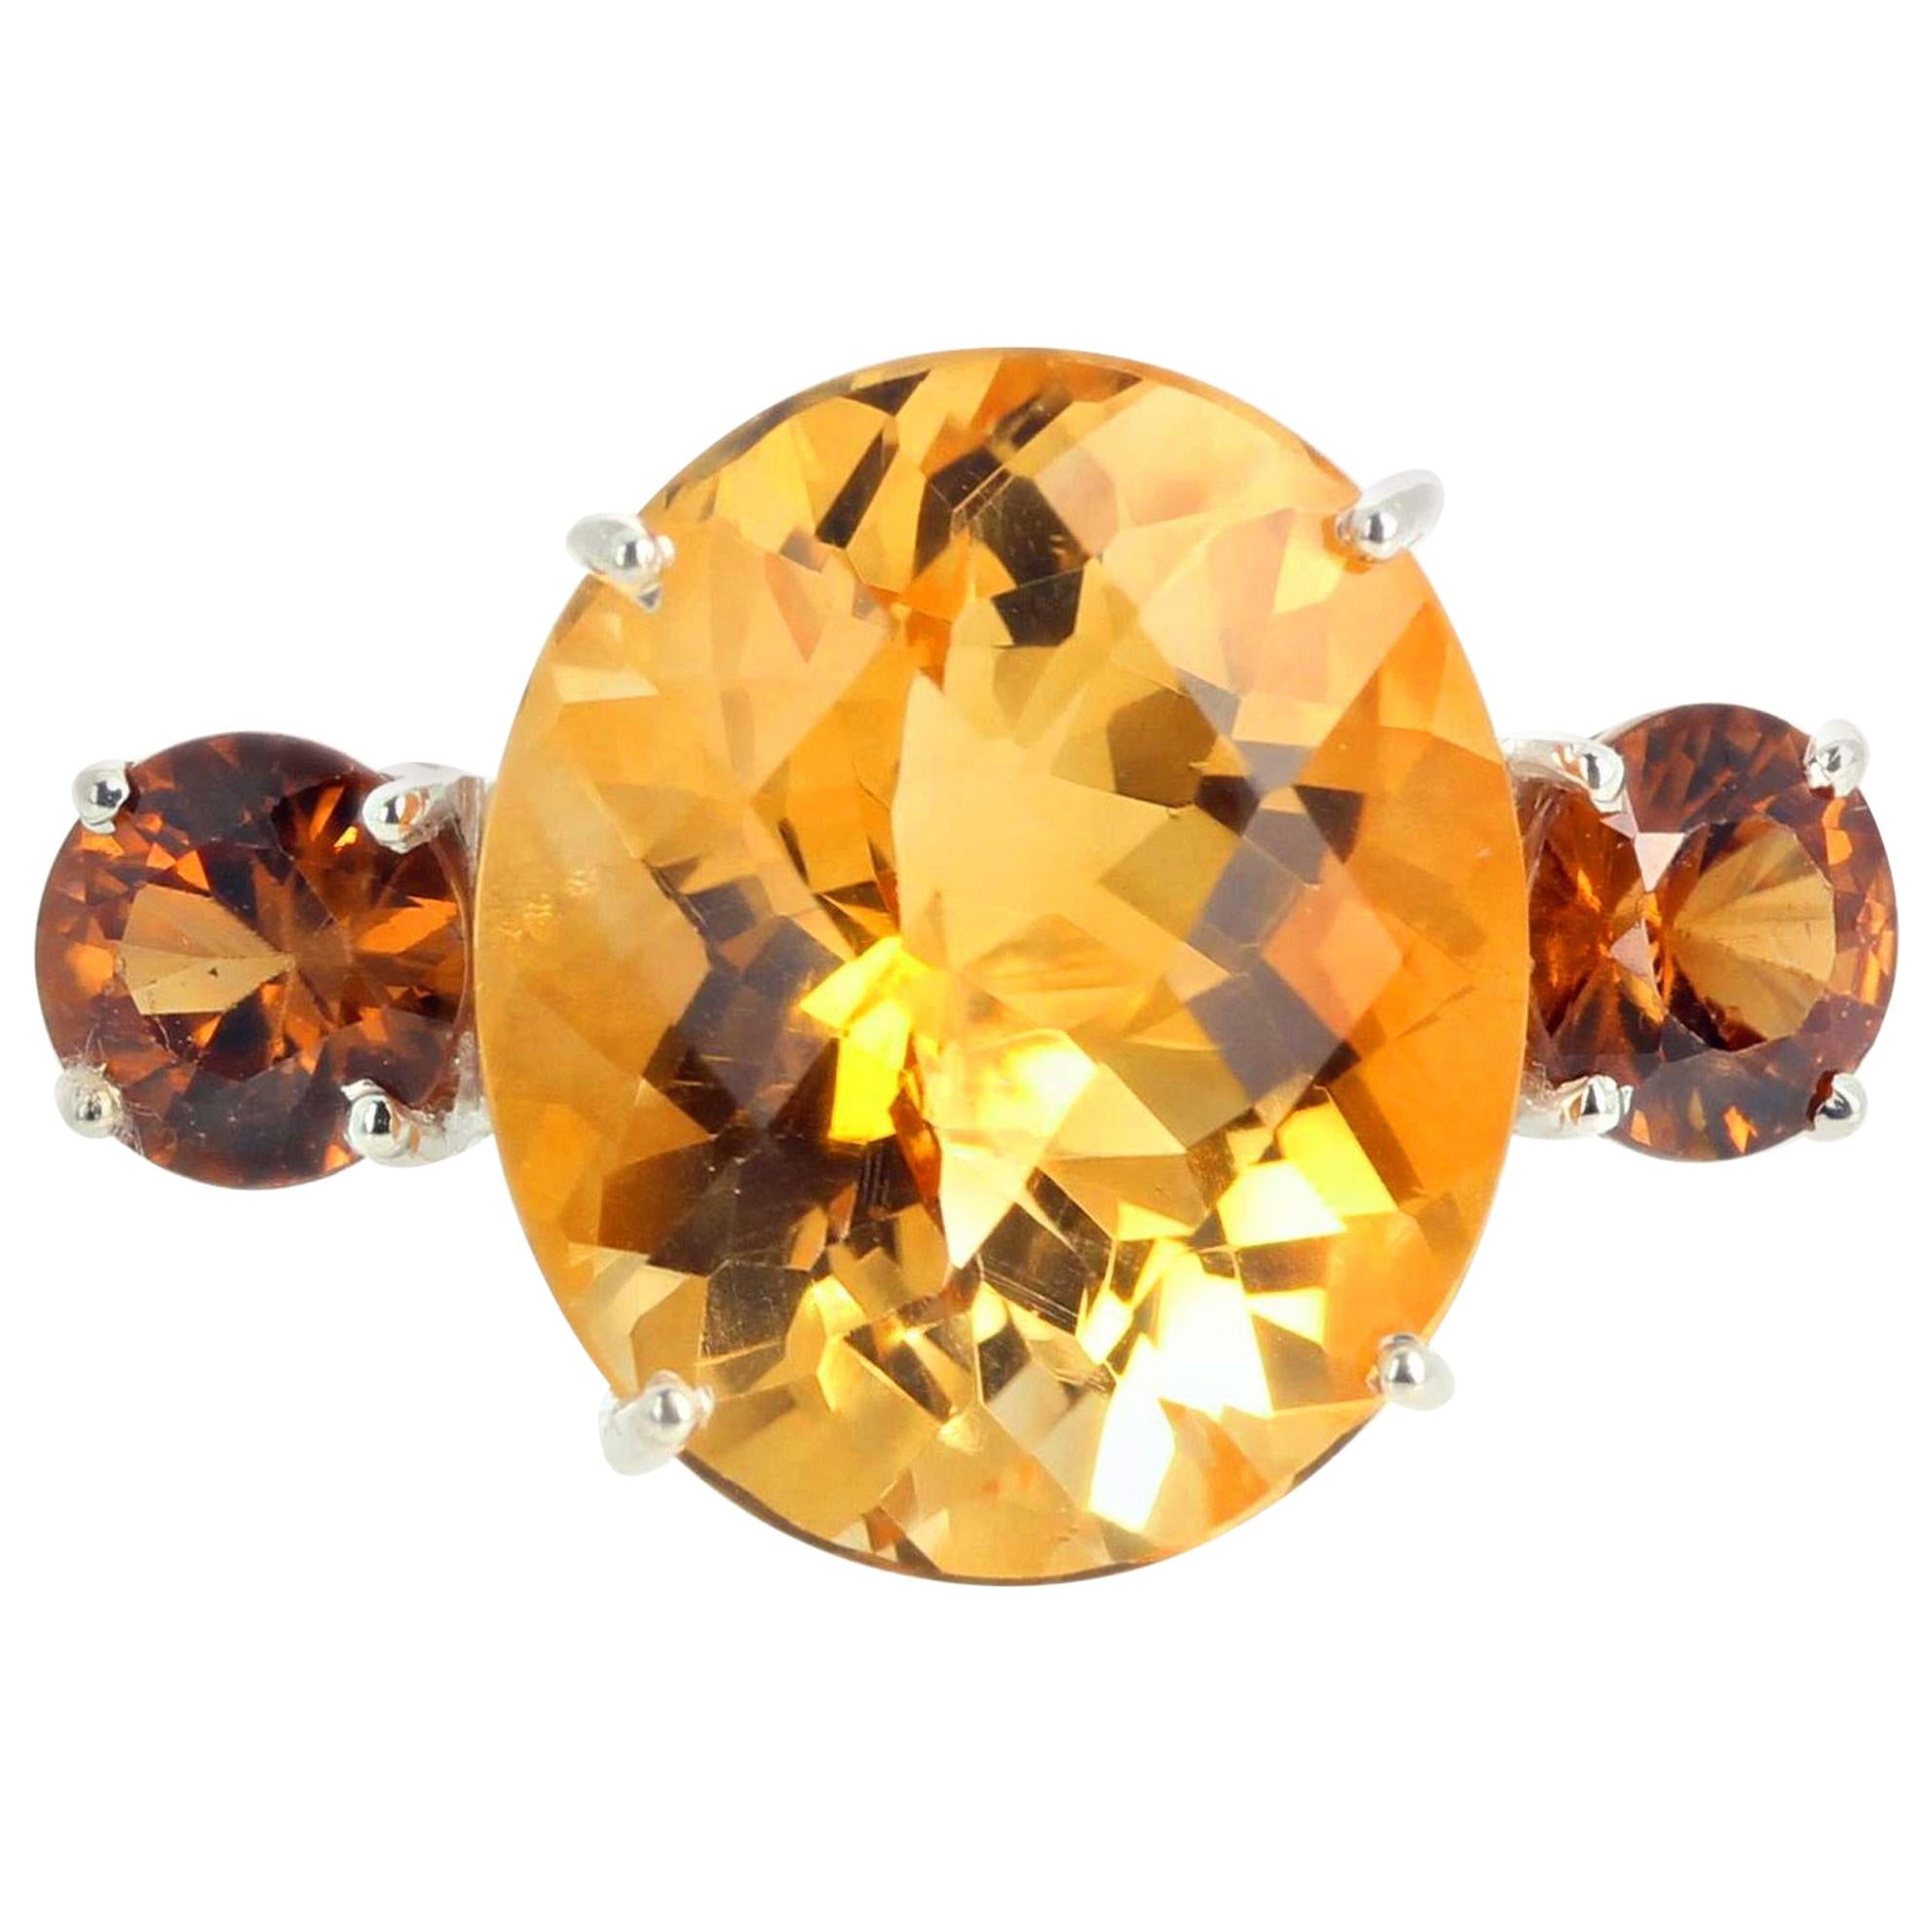 Gemjunky "Hollywood Glam" 19 Carat Dazzling Fiery Yellow Gold Citrine Ring